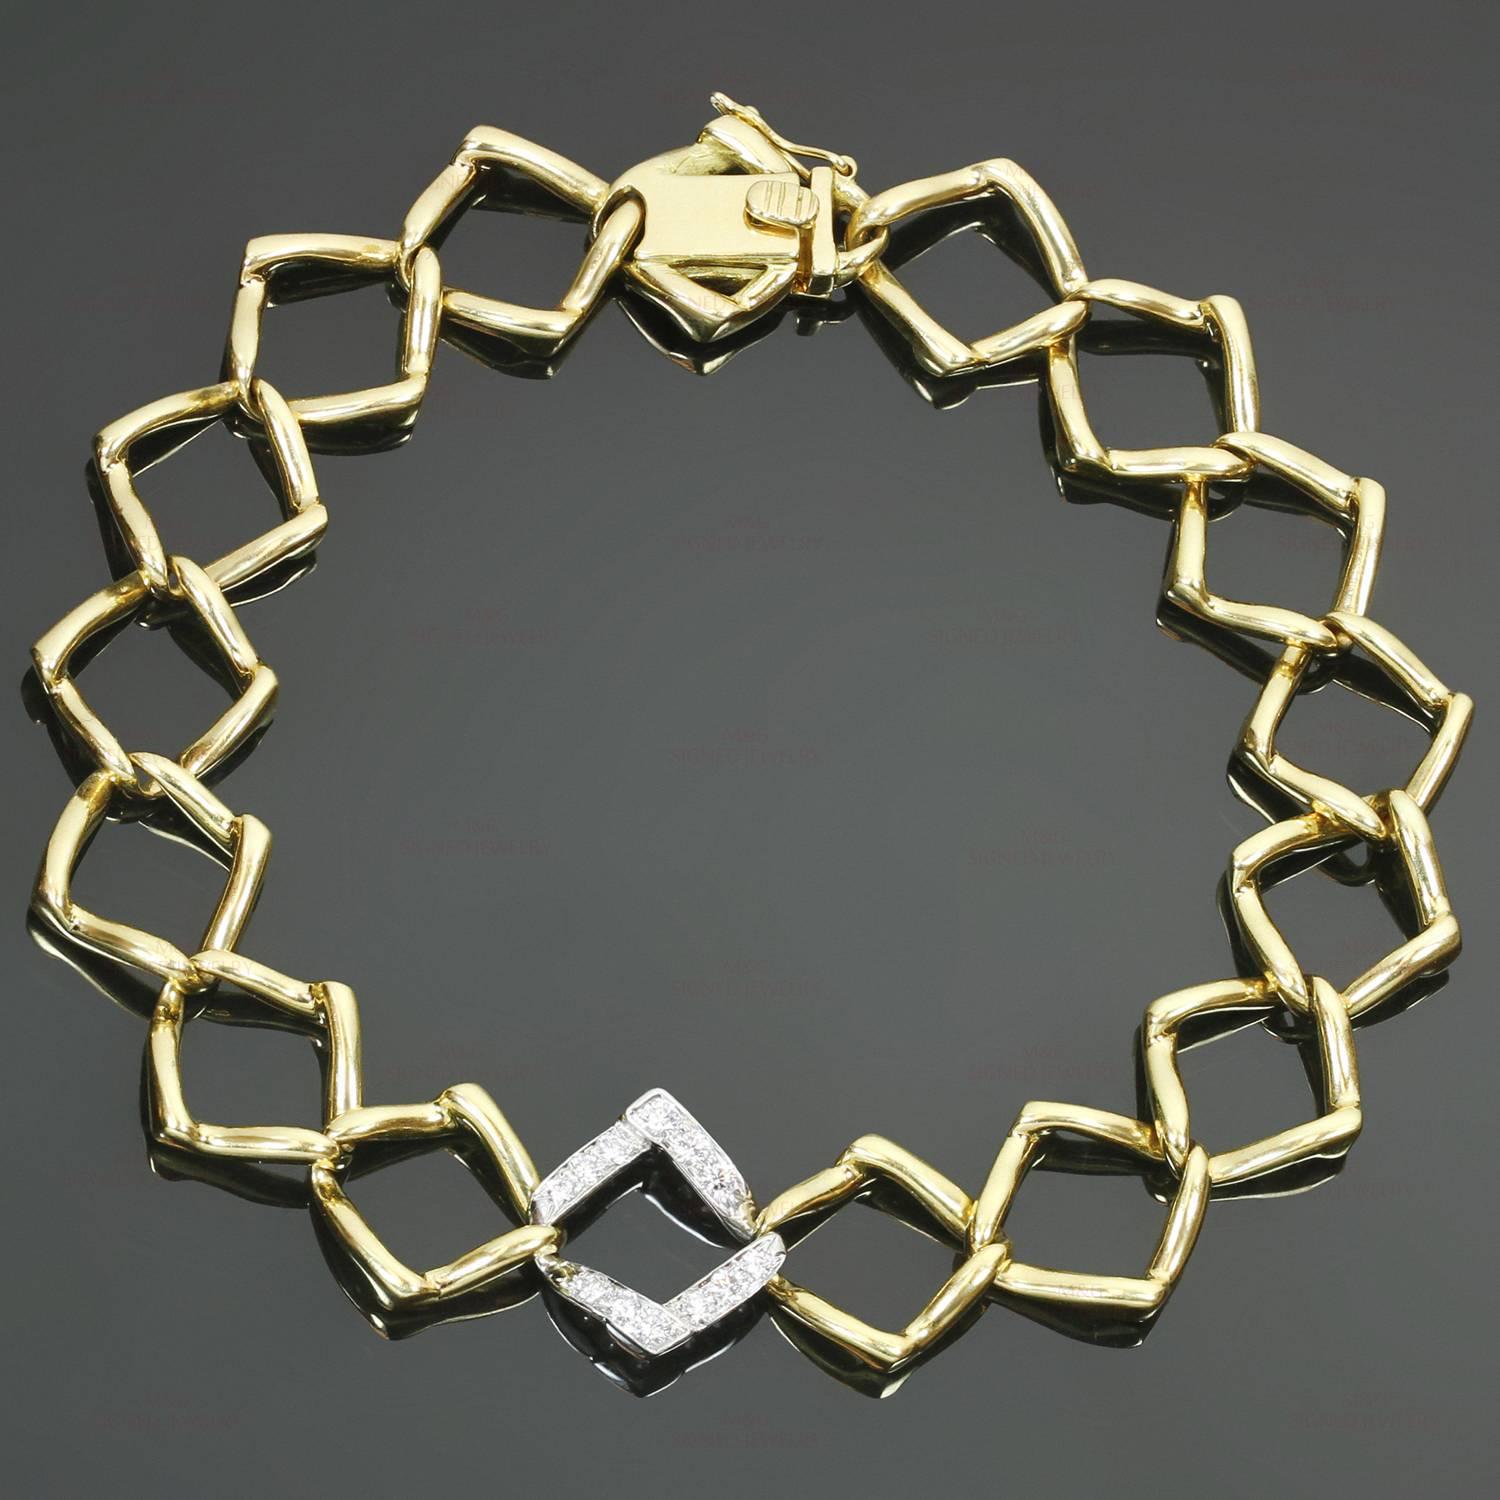 This classic Tiffany bracelet designed by Paloma Picasso features an open link design crafted in 18k yellow gold and accented with a platinum link set with brilliant-cut round diamonds. Made in United States circa 1981. Measurements: 0.47"